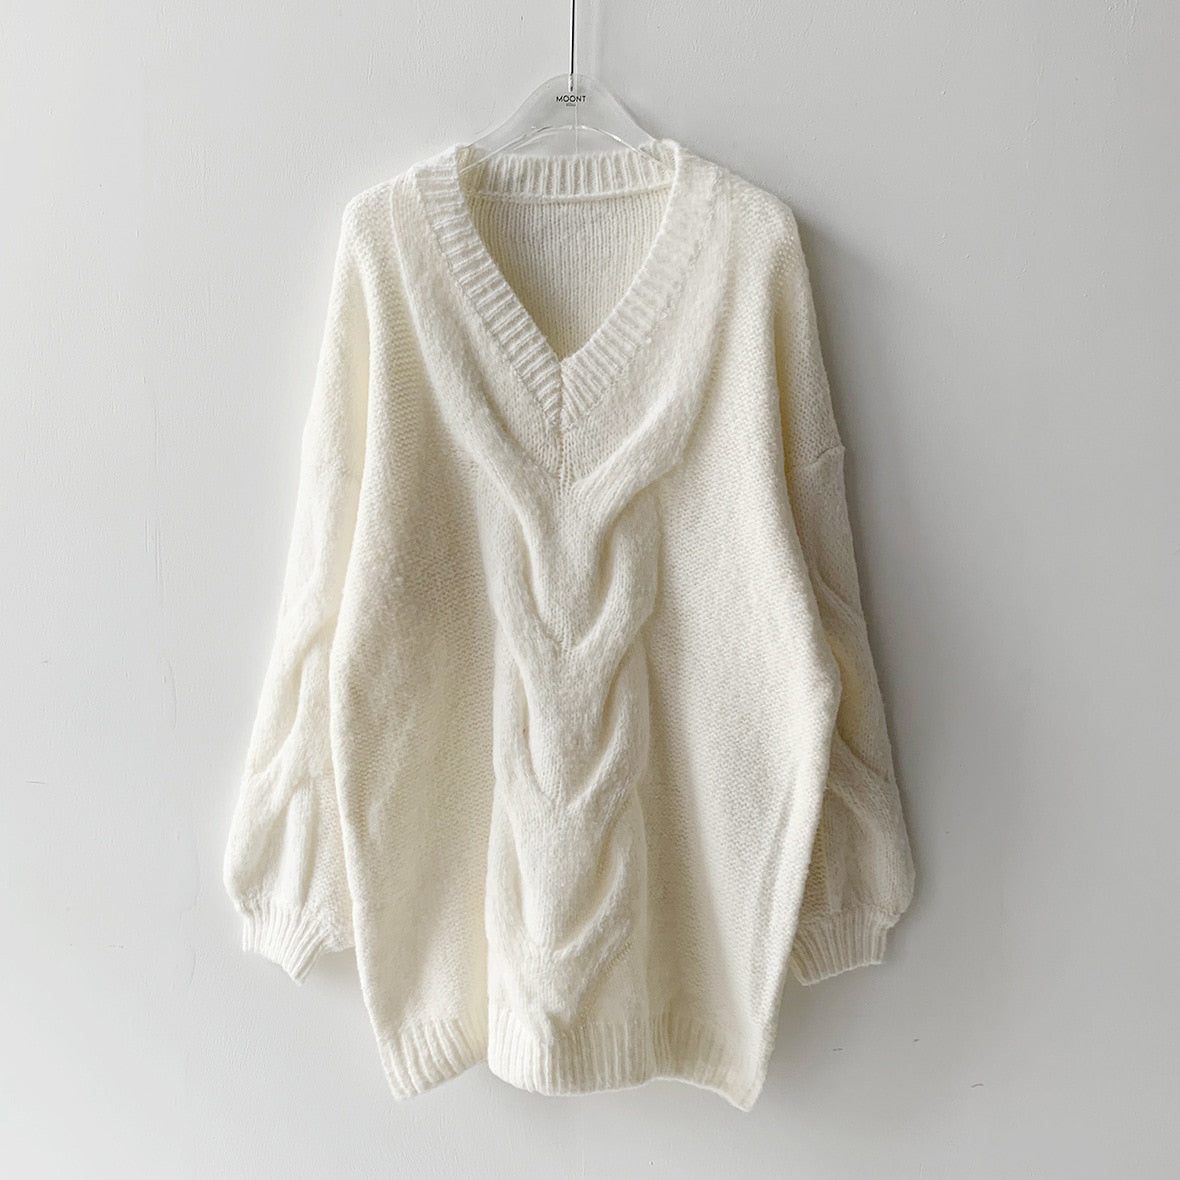 Tossy 2023 New Long Sleeve Sweater Dress Women Autumn Winter Oversized Sweater Casual White V-Neck Pullover Loose Knit Dress